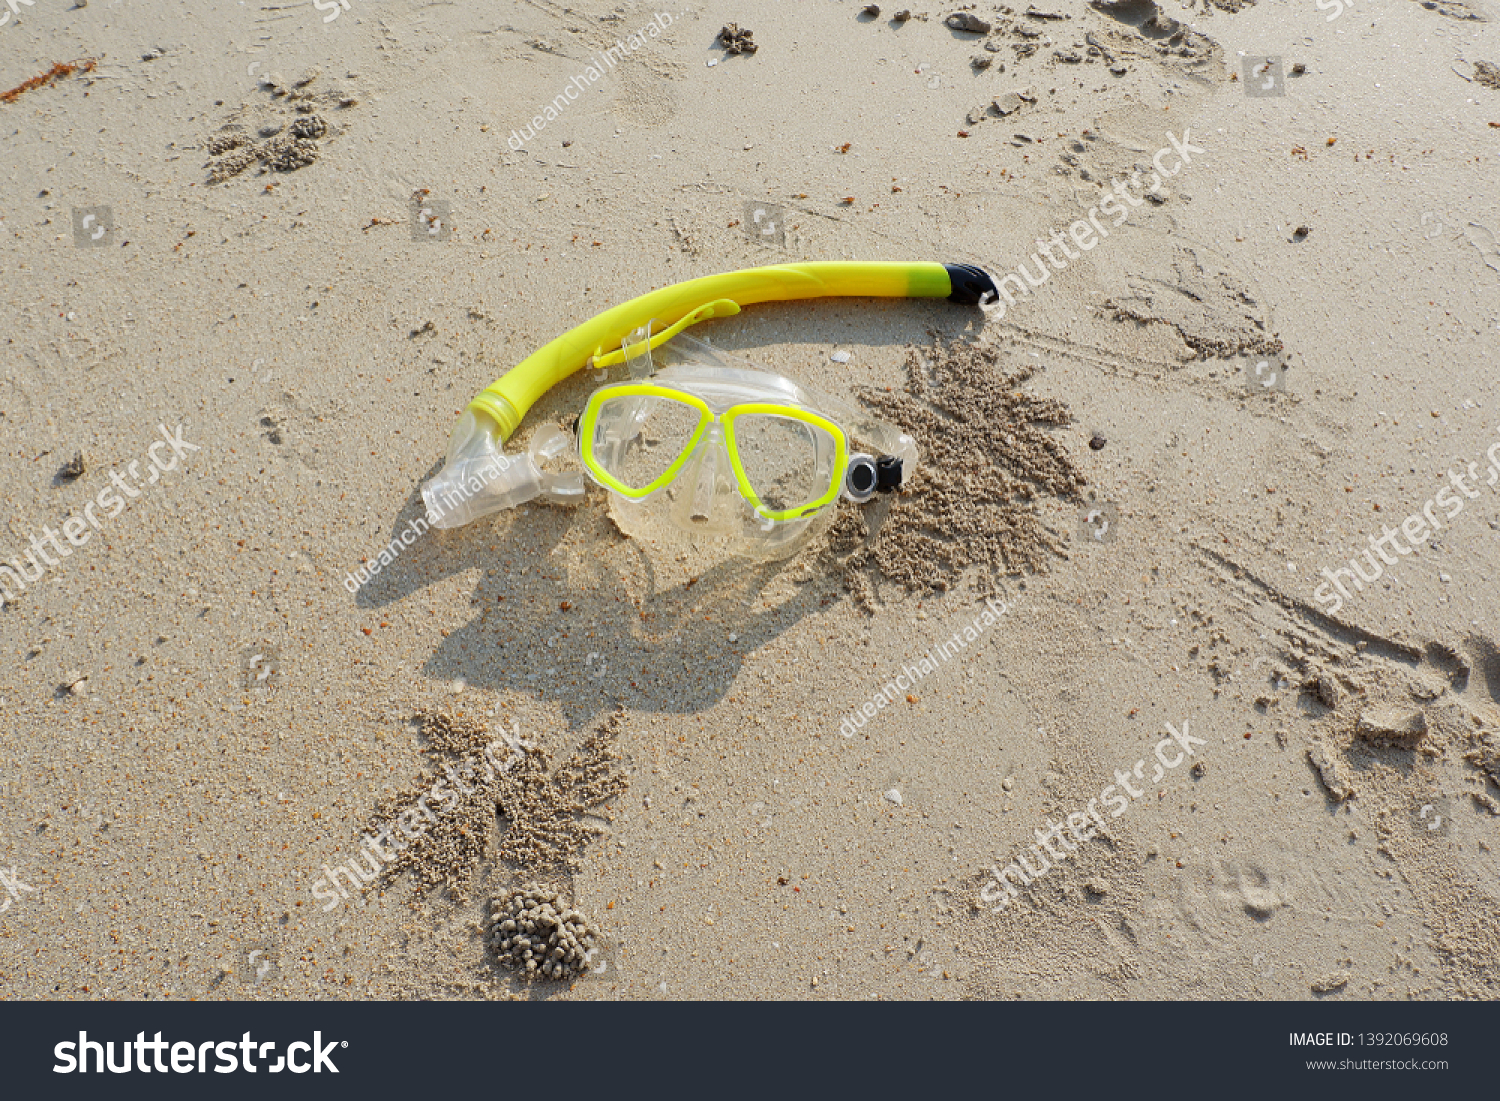 Snorkel and scuba mask on the beach. #1392069608